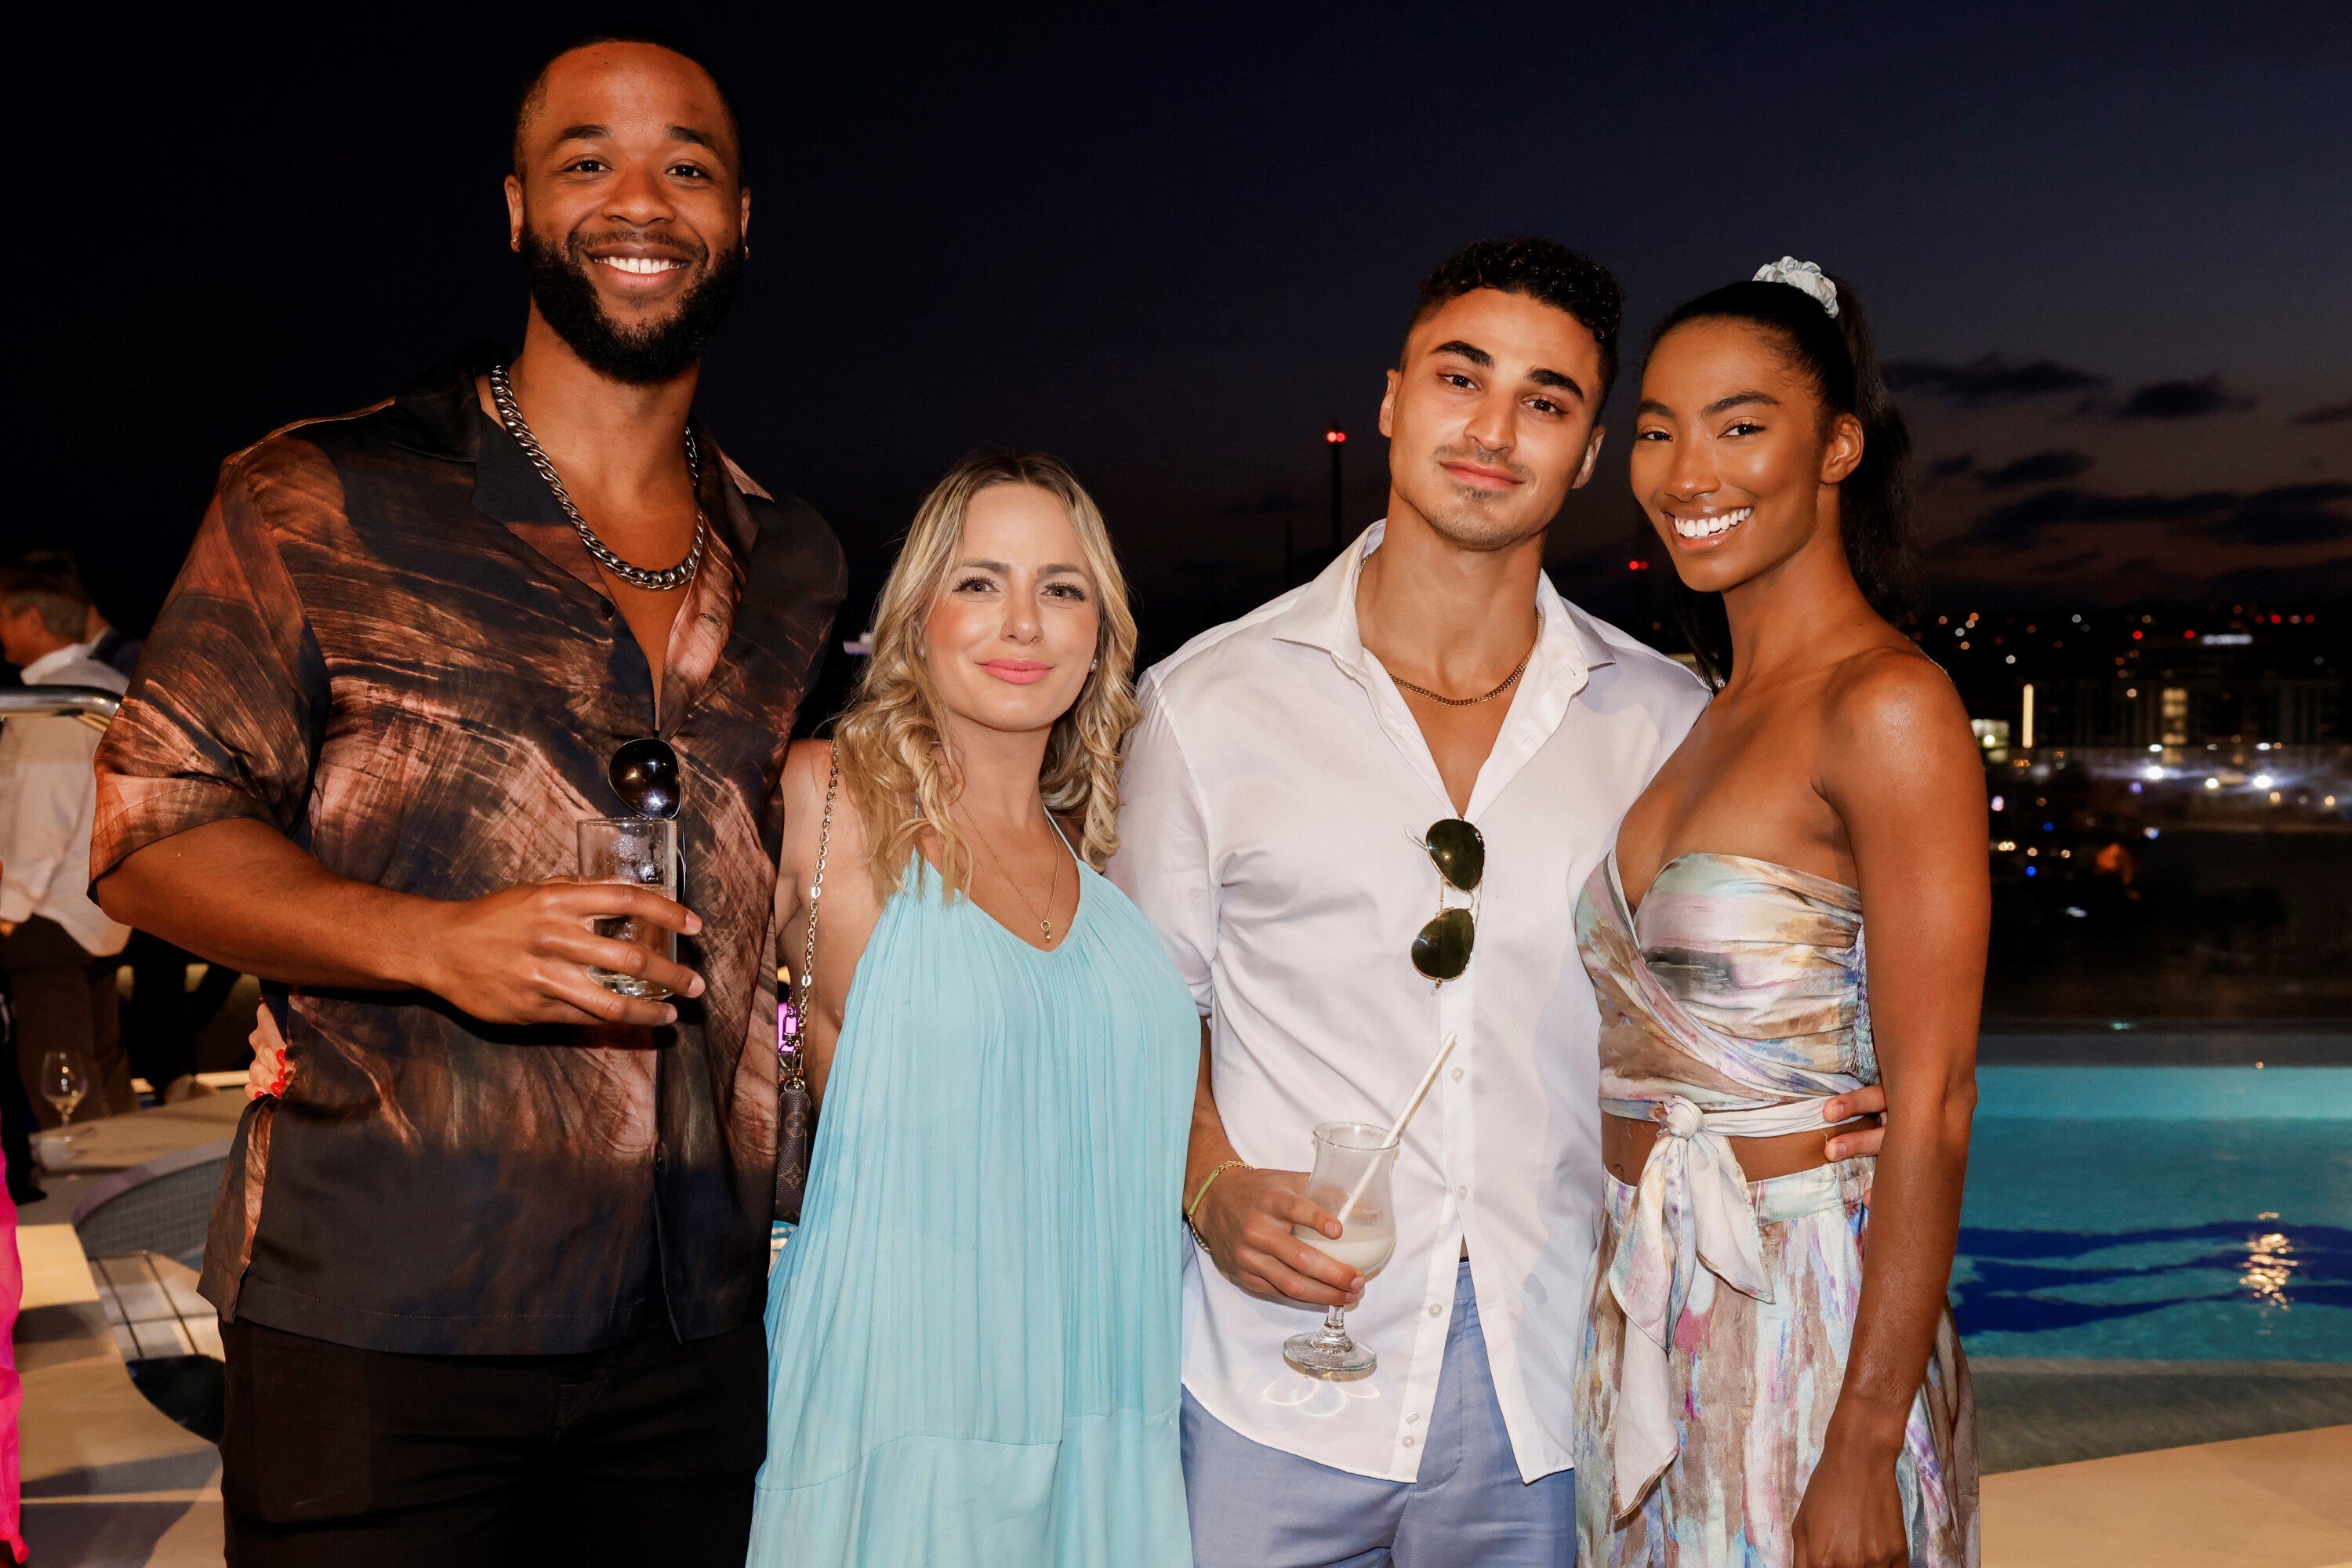 'Big Brother 24' alumni Monte Taylor, Indy Santos, Joseph Abdin, and Taylor Hale, and other CBS couples, attend the launch party for 'The Real Love Boat' on a ship. Monte, Indy, Joseph, and Taylor pose for pictures together.